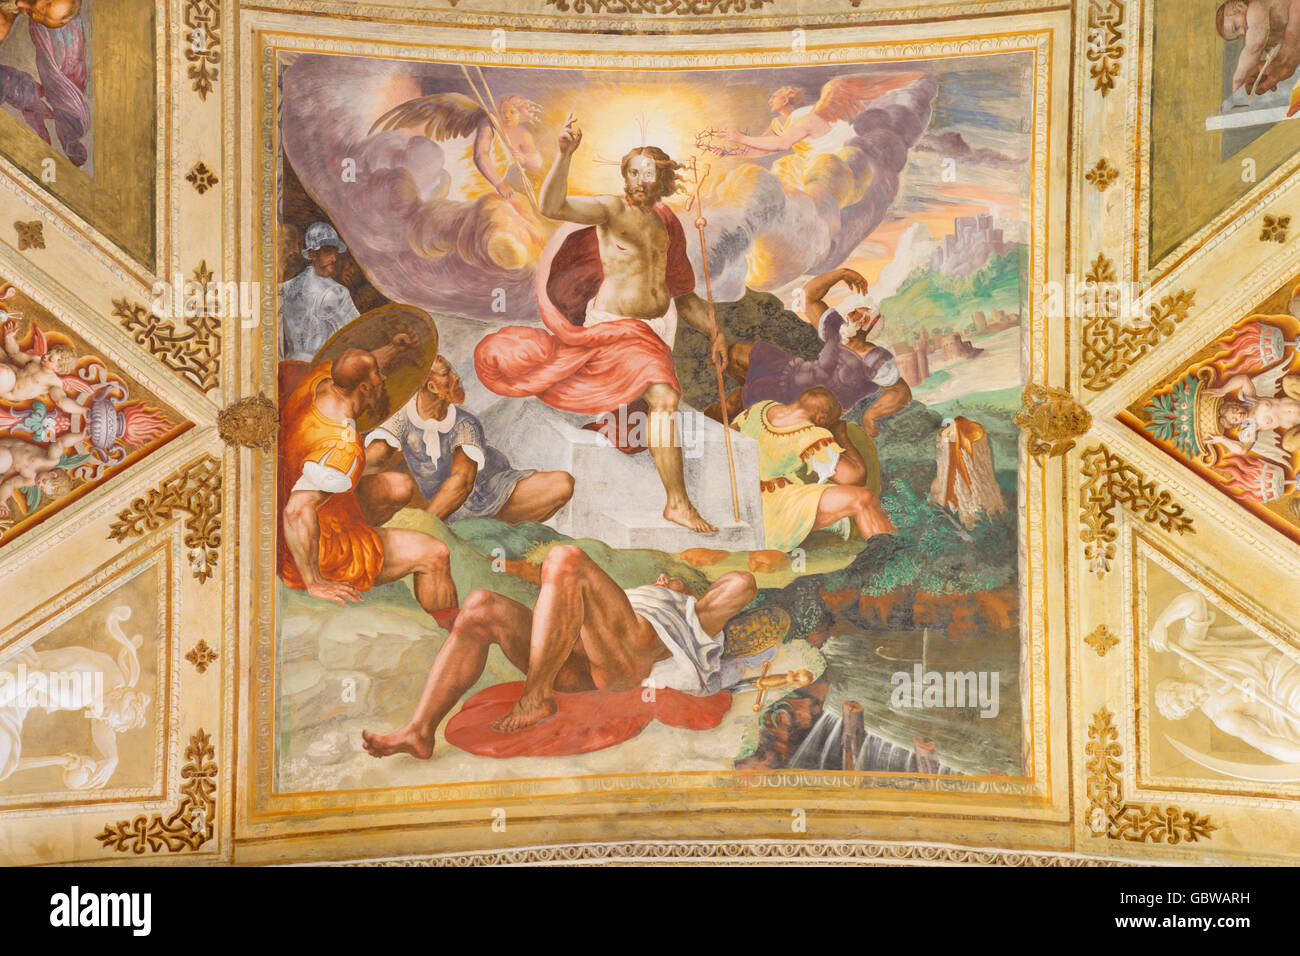 CREMONA, ITALY - MAY 24, 2016: The Resurrection  fresco in the center of the vault in Chiesa di San Sigismondo by Giulio Campi Stock Photo